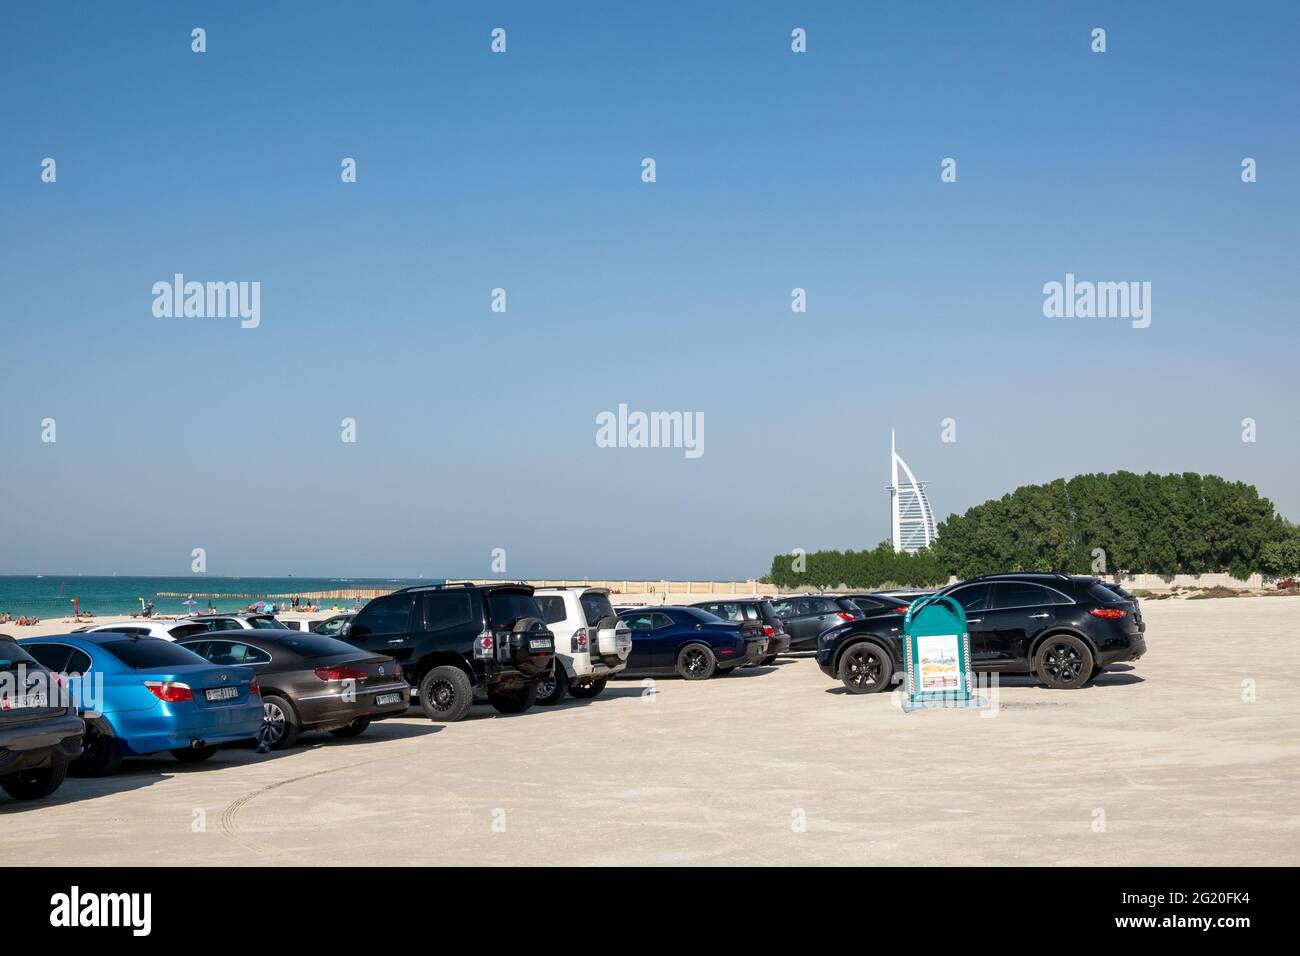 Cars parked on one of the few public beaches in Dubai, UAE. Stock Photo